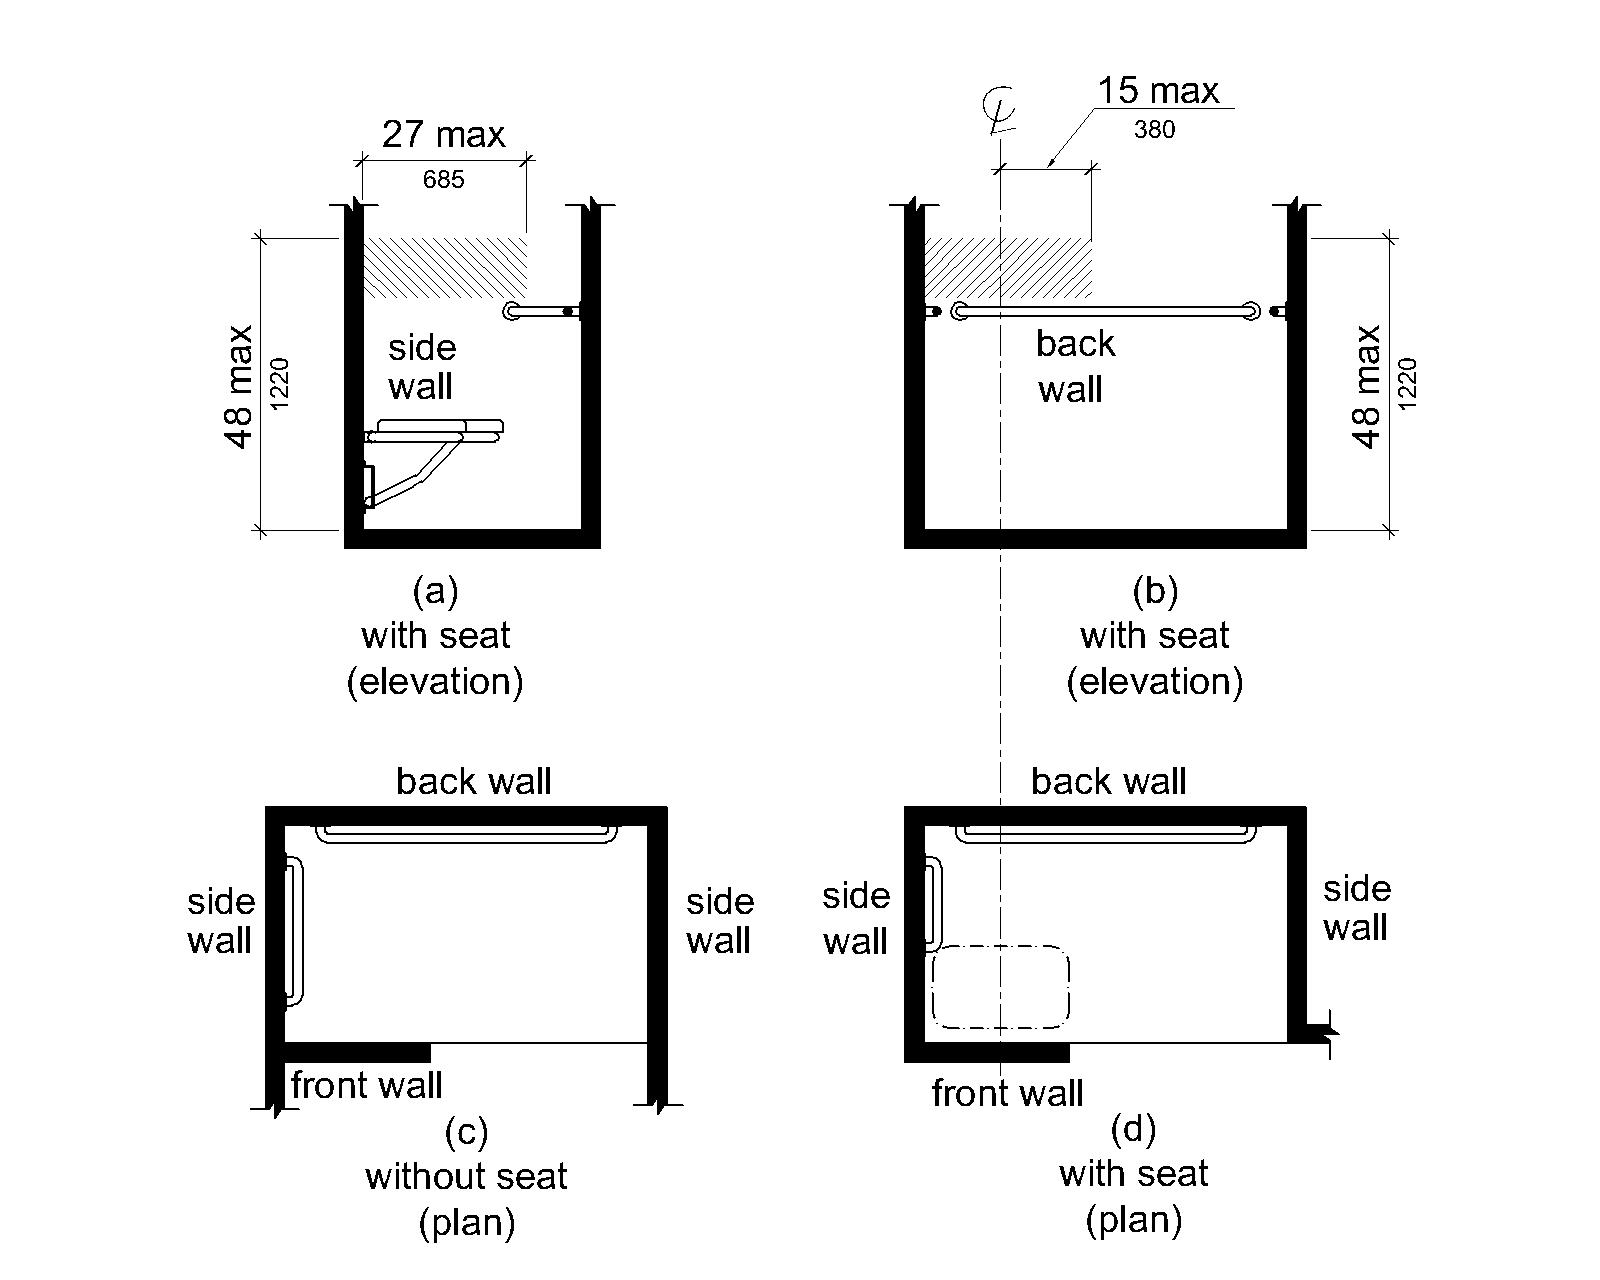 Figure (a) is an elevation drawing of a side wall adjacent to a seat. The area for controls, faucets and shower spray units is located on the side wall adjacent to the seat, above the grab bar but no higher than 48 inches (1220 mm) above the shower deck surface, and extending 27 inches (685 mm) maximum from the seat wall. Figure (b) shows an alternate location on the back wall, above the grab bar but no higher than 48 inches (1220 mm) above the shower deck surface, and extending from the side wall to 15 inches (380 mm) maximum from the center line of the seat. Figures (c) and (d) are plan views of compartments without and with a seat, respectively.